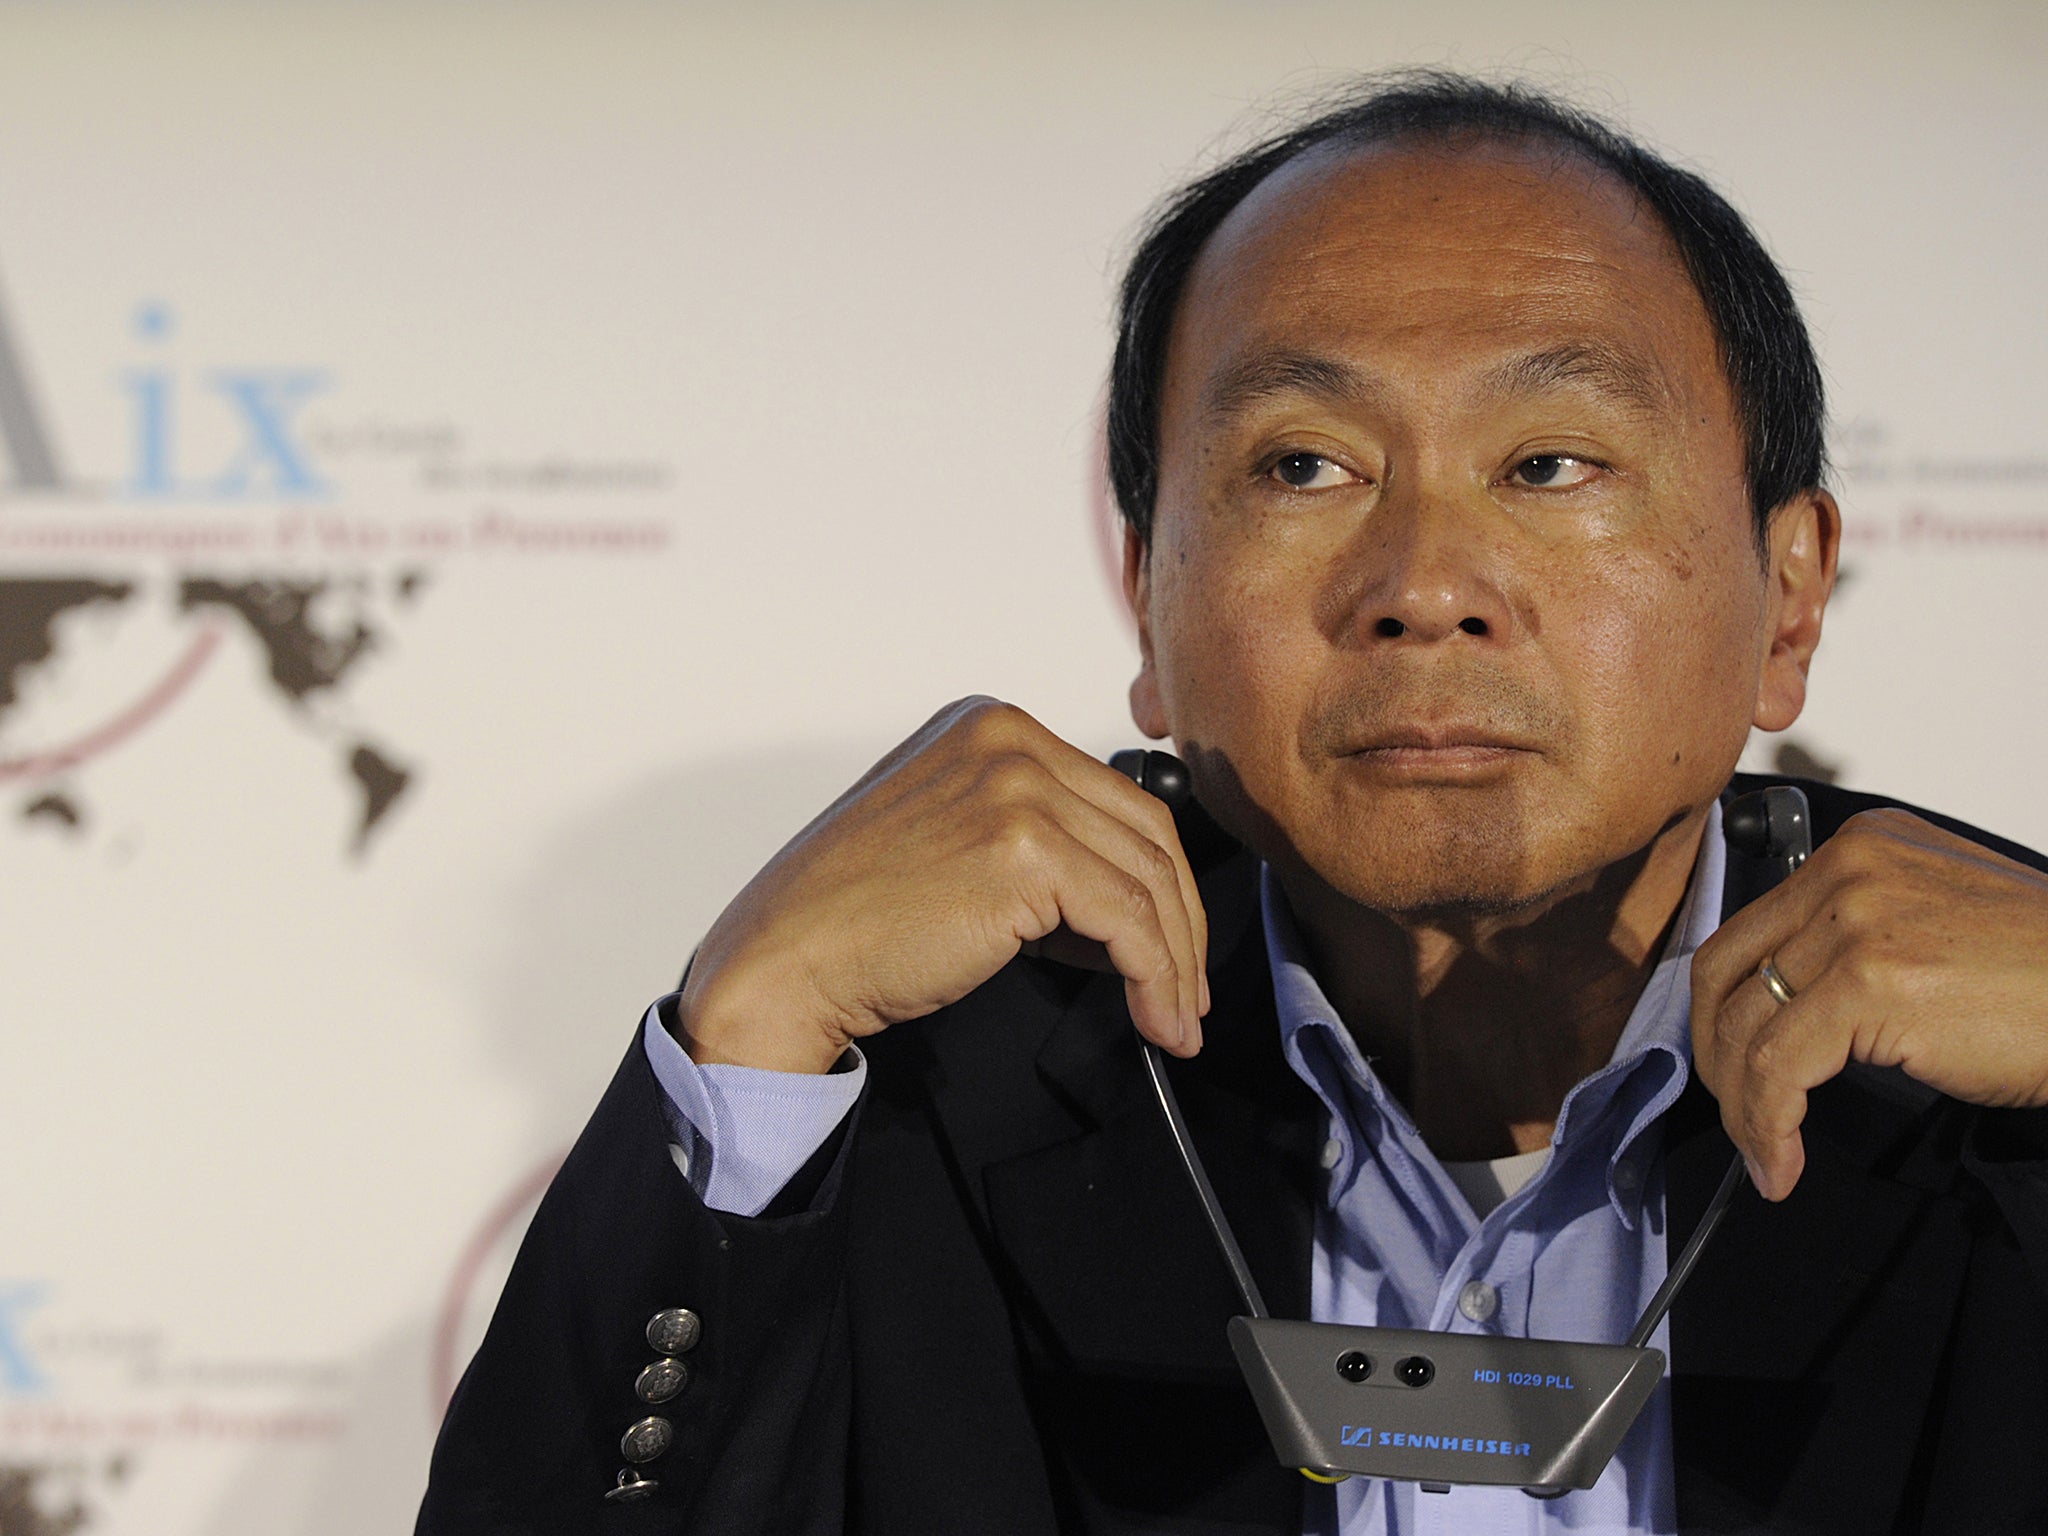 Fukuyama attends a conference during the first day of the 2013 Economic Forum in Aix-en-Provence